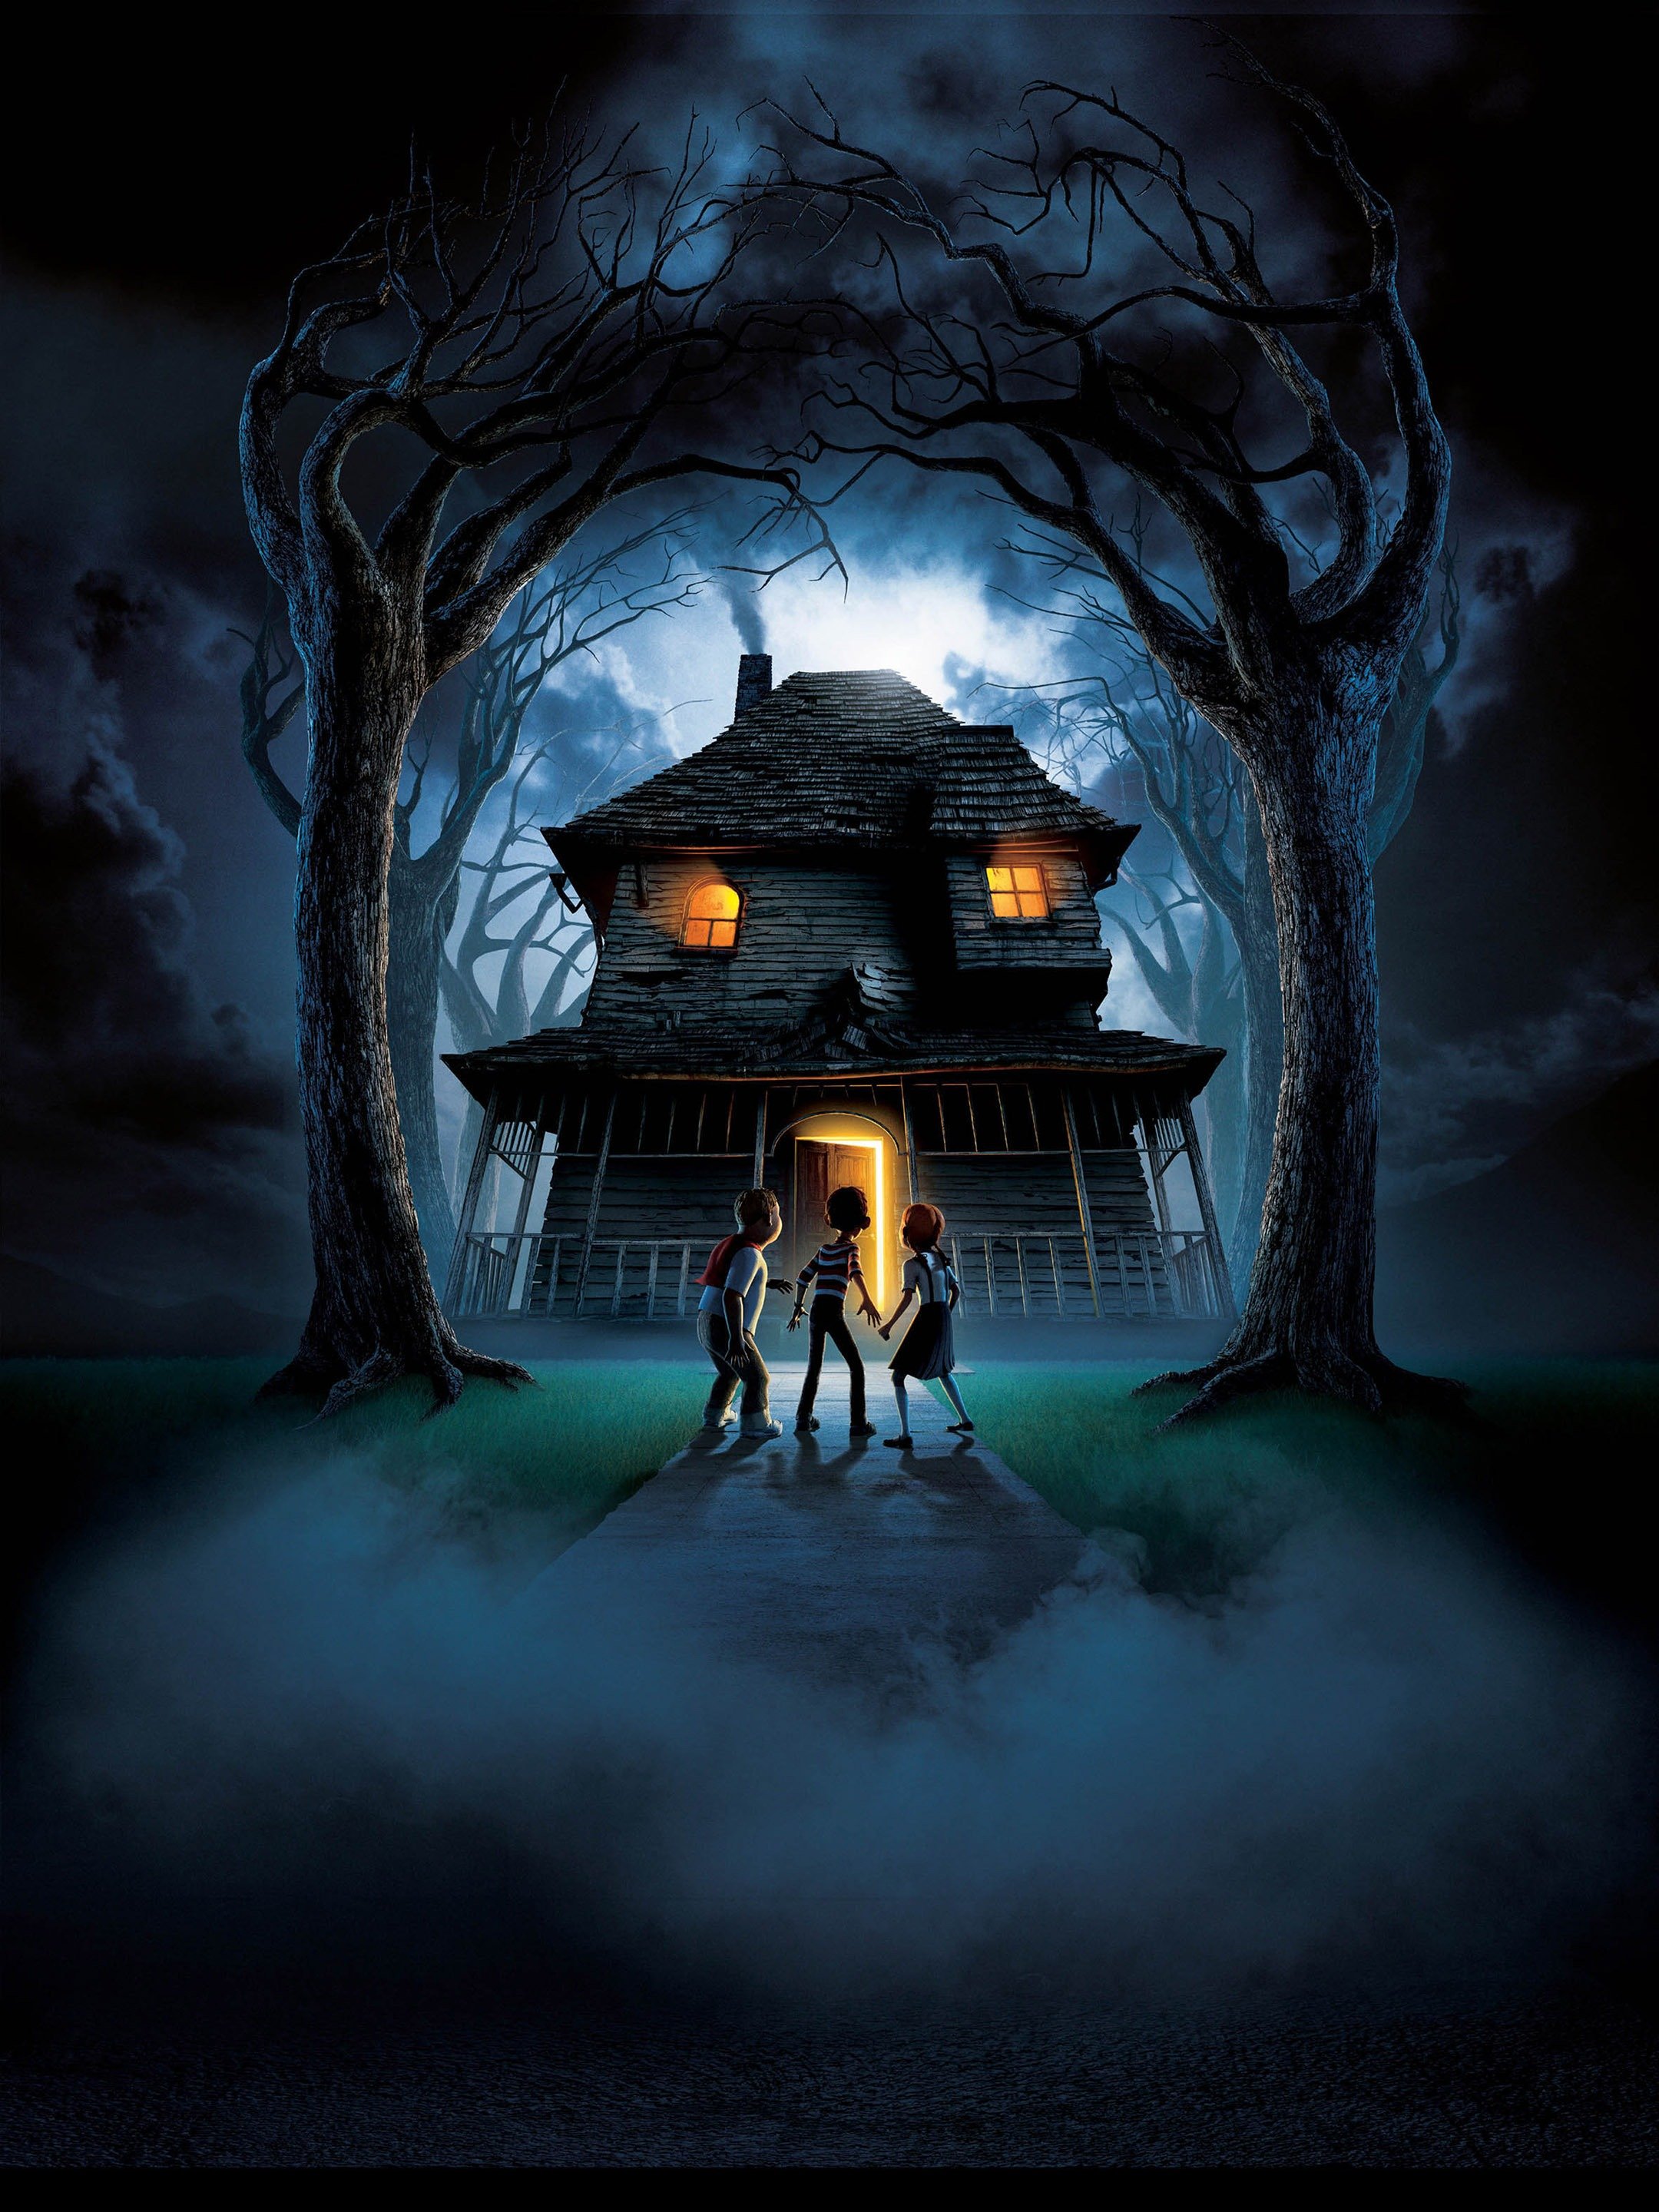 Monster House: Official Clip - The House is Alive! - Trailers & Videos -  Rotten Tomatoes